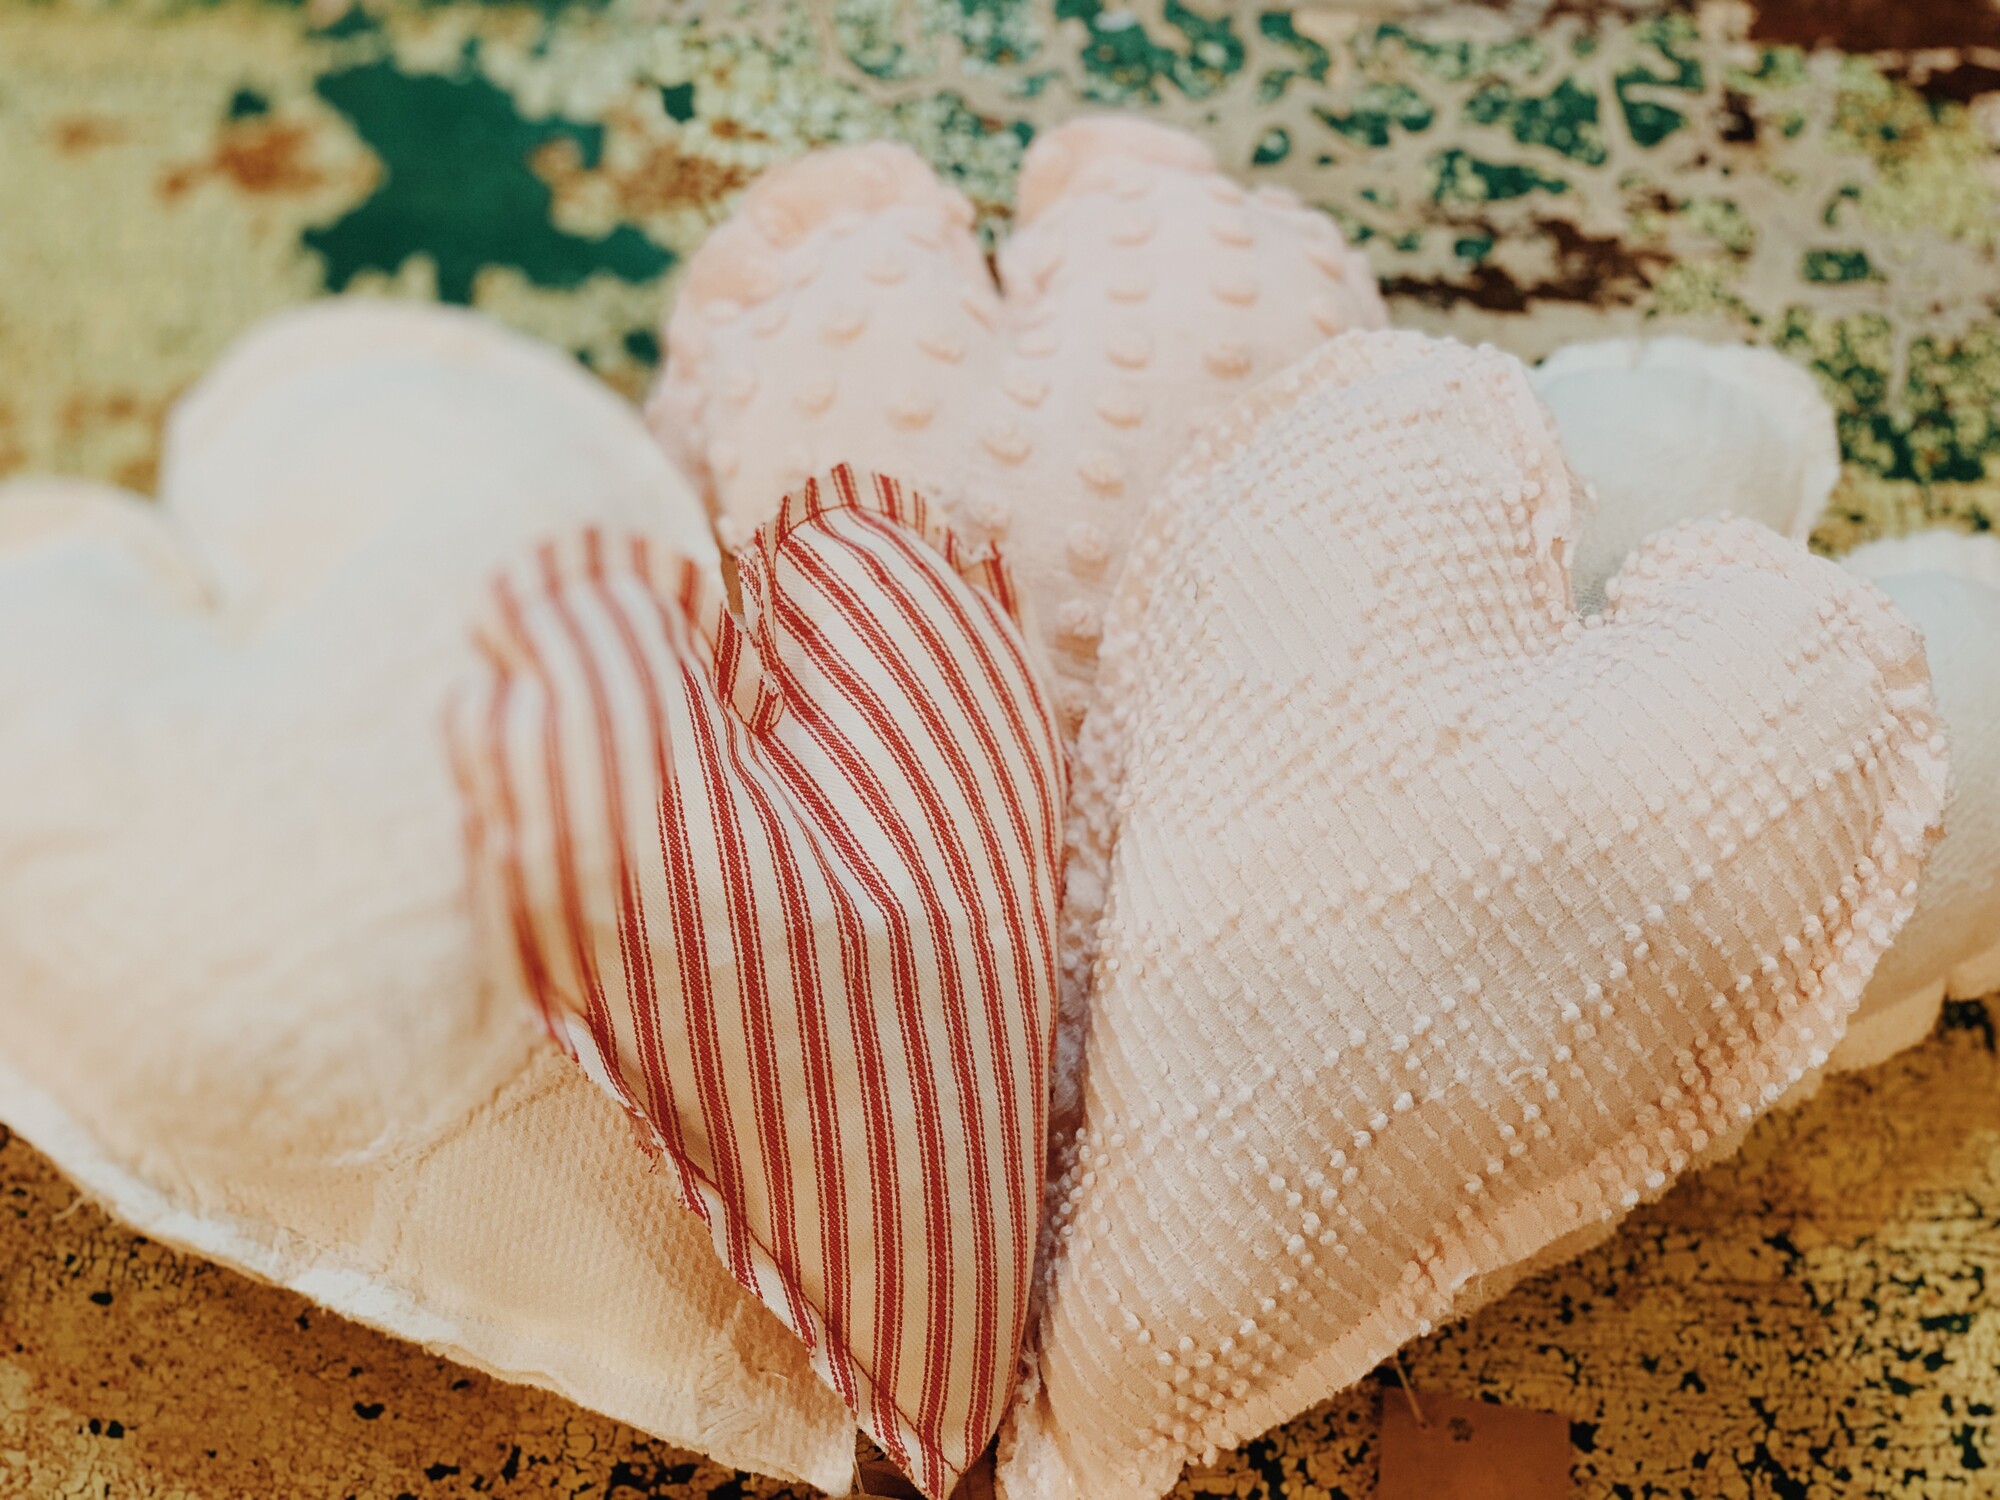 These adorable valentine hearts were handmade from vintage fabrics. They are available in Pink Chenille, White Chenille, White Muslin, Pink Popcorn, and Red Ticking Stripes.